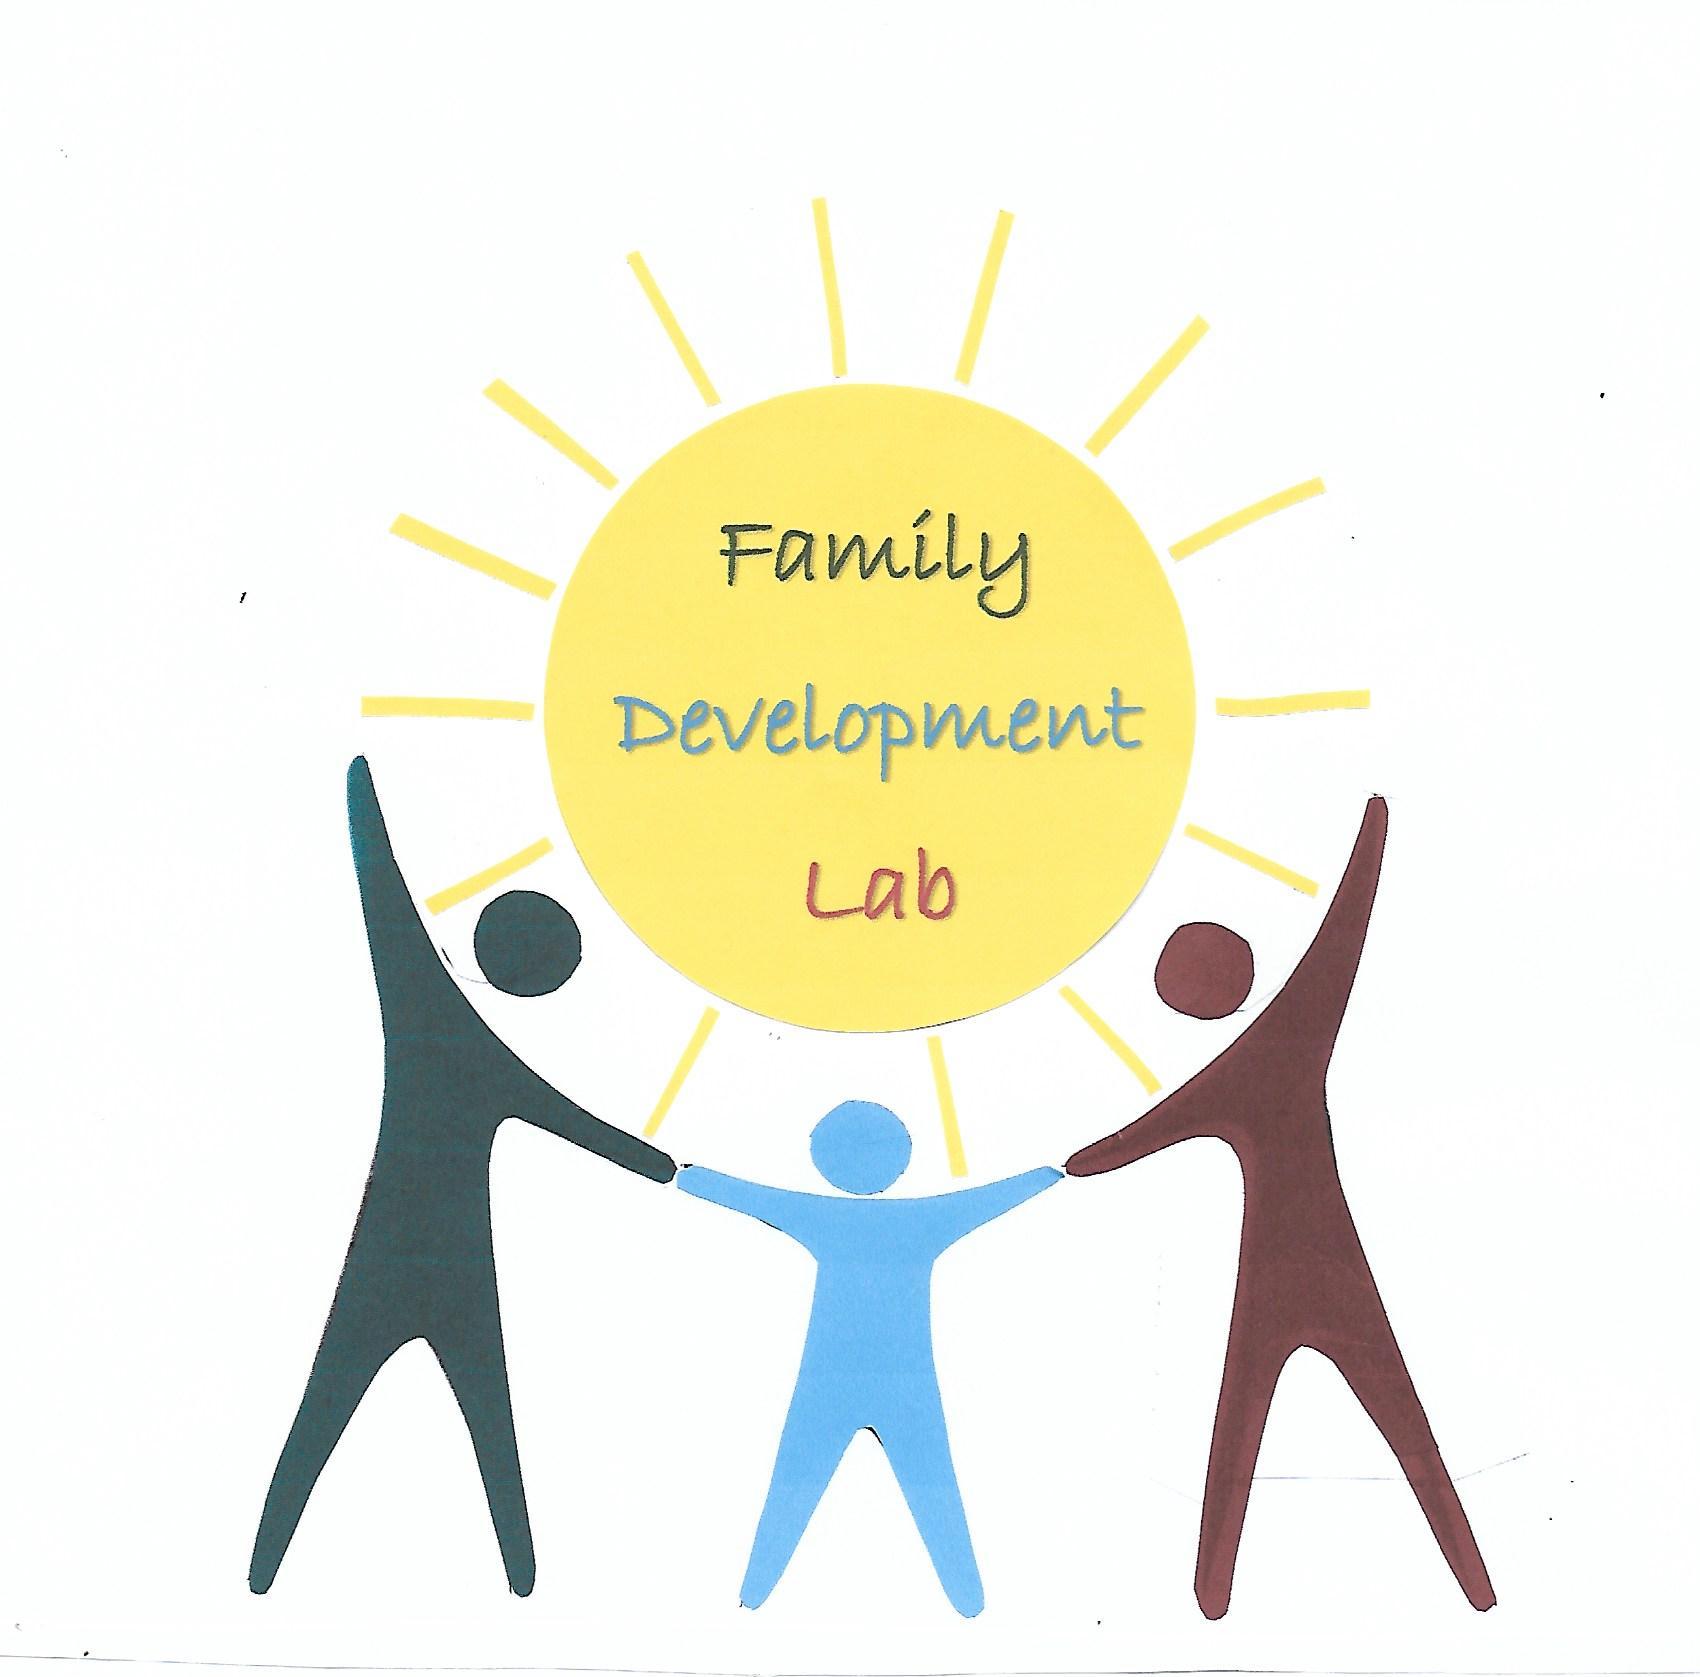 A logo that says "Family Development Lab". The logo shows two parents holding hands with a child.